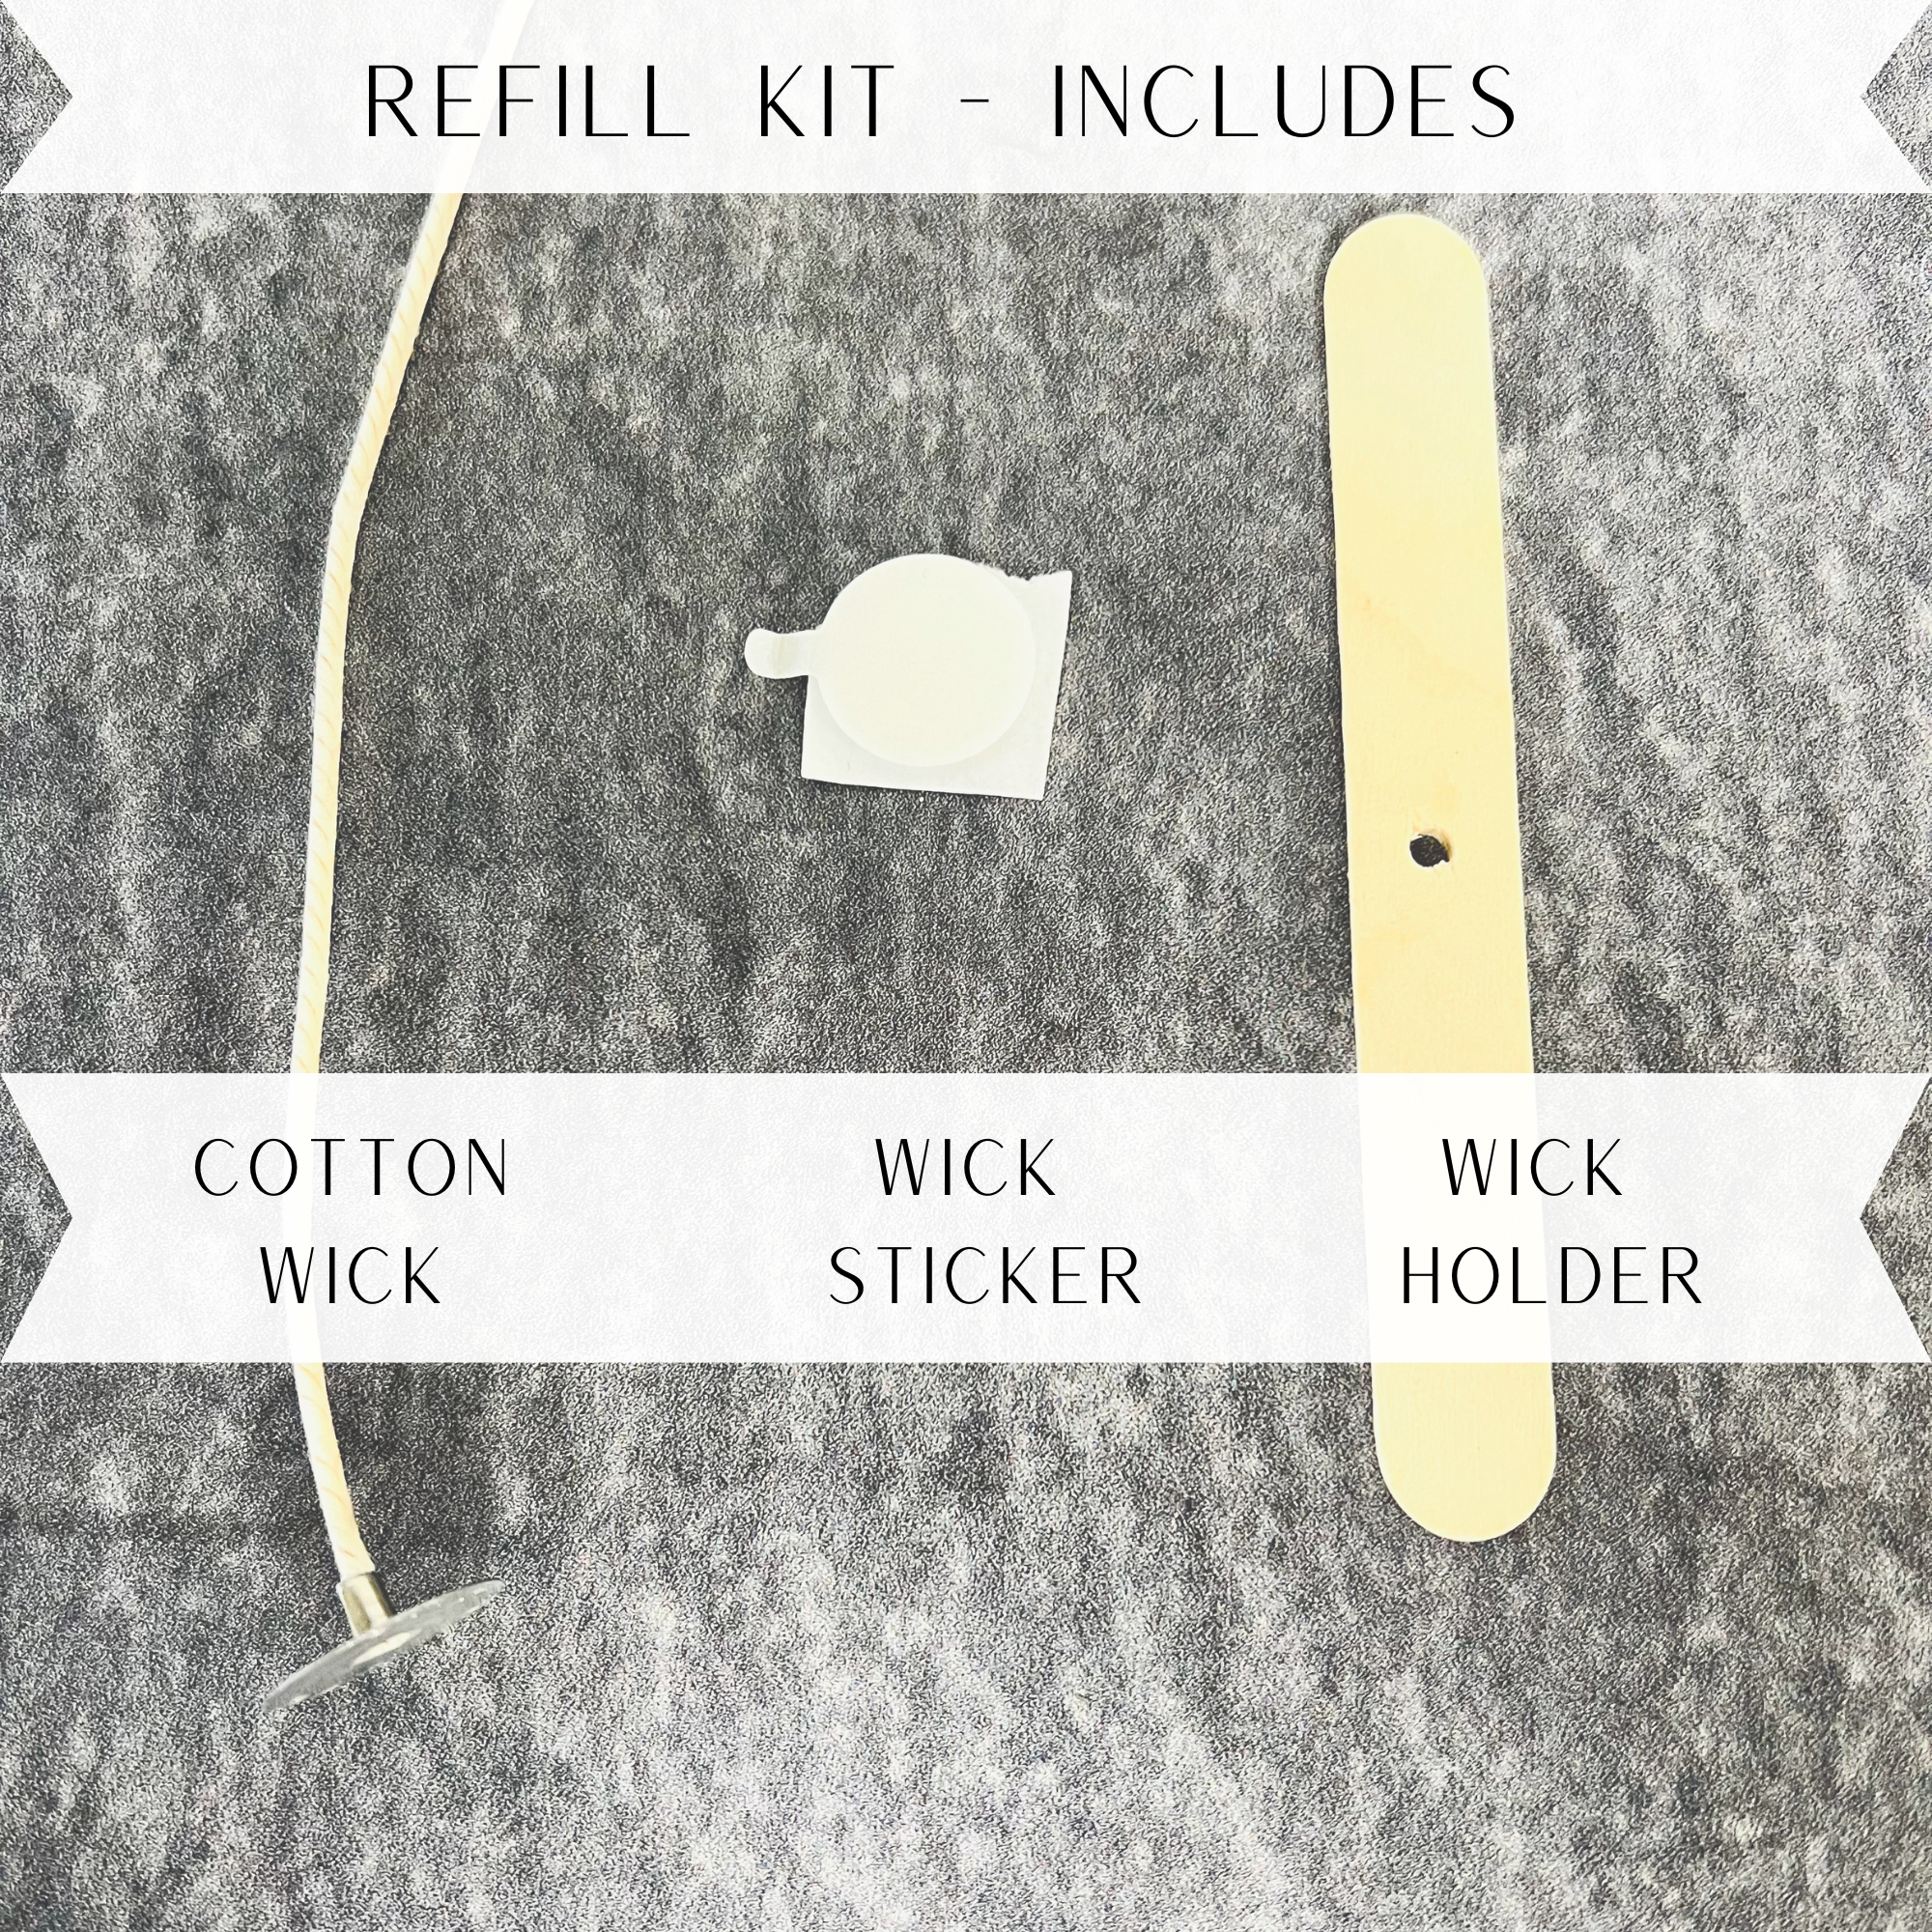 A cotton wick, a wick stick and a wooden wick holder that reads refill kit includes